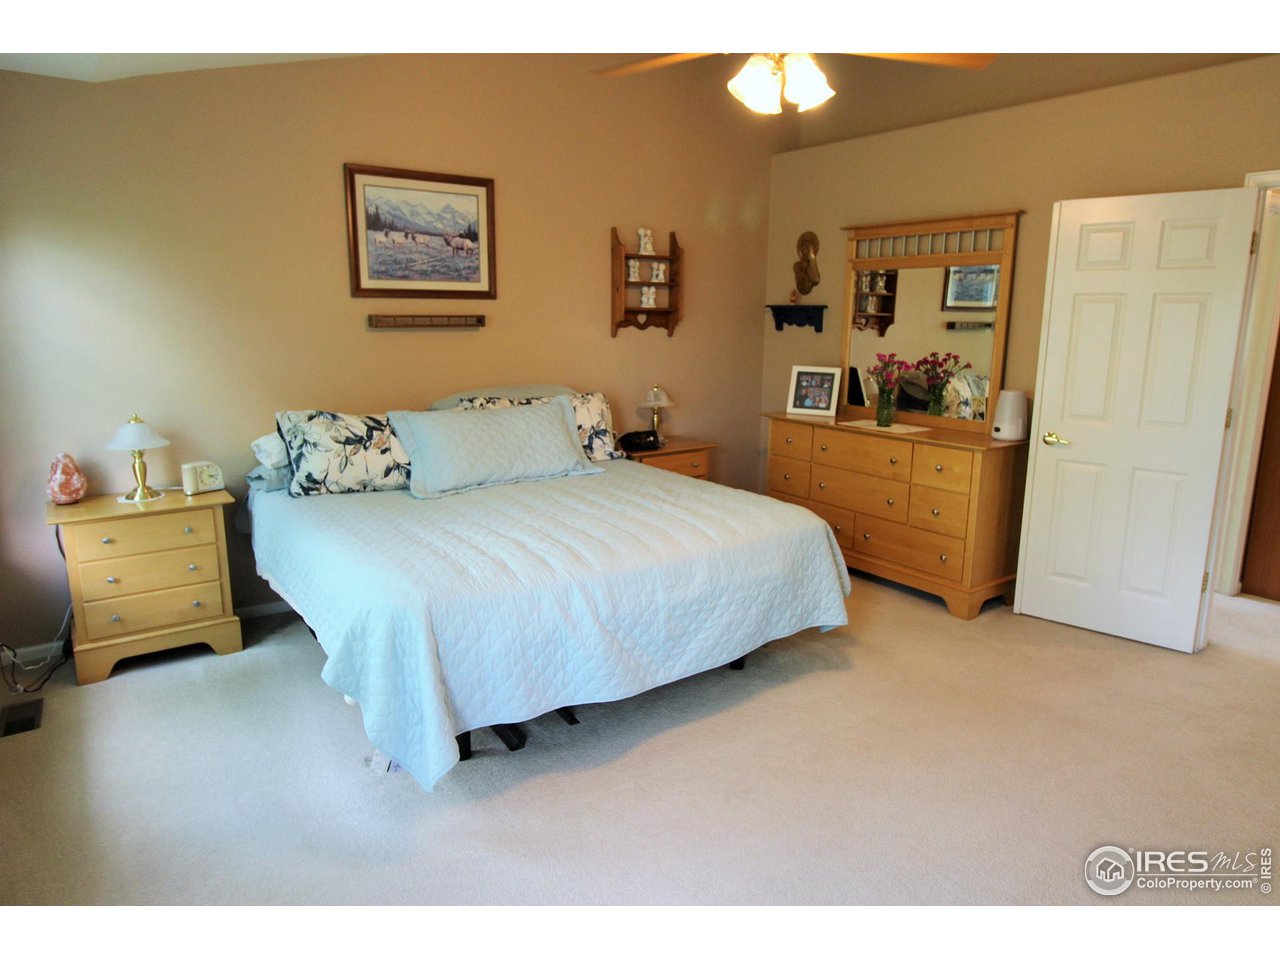 Large master suite with room for a king size bed, end tables and dressers.